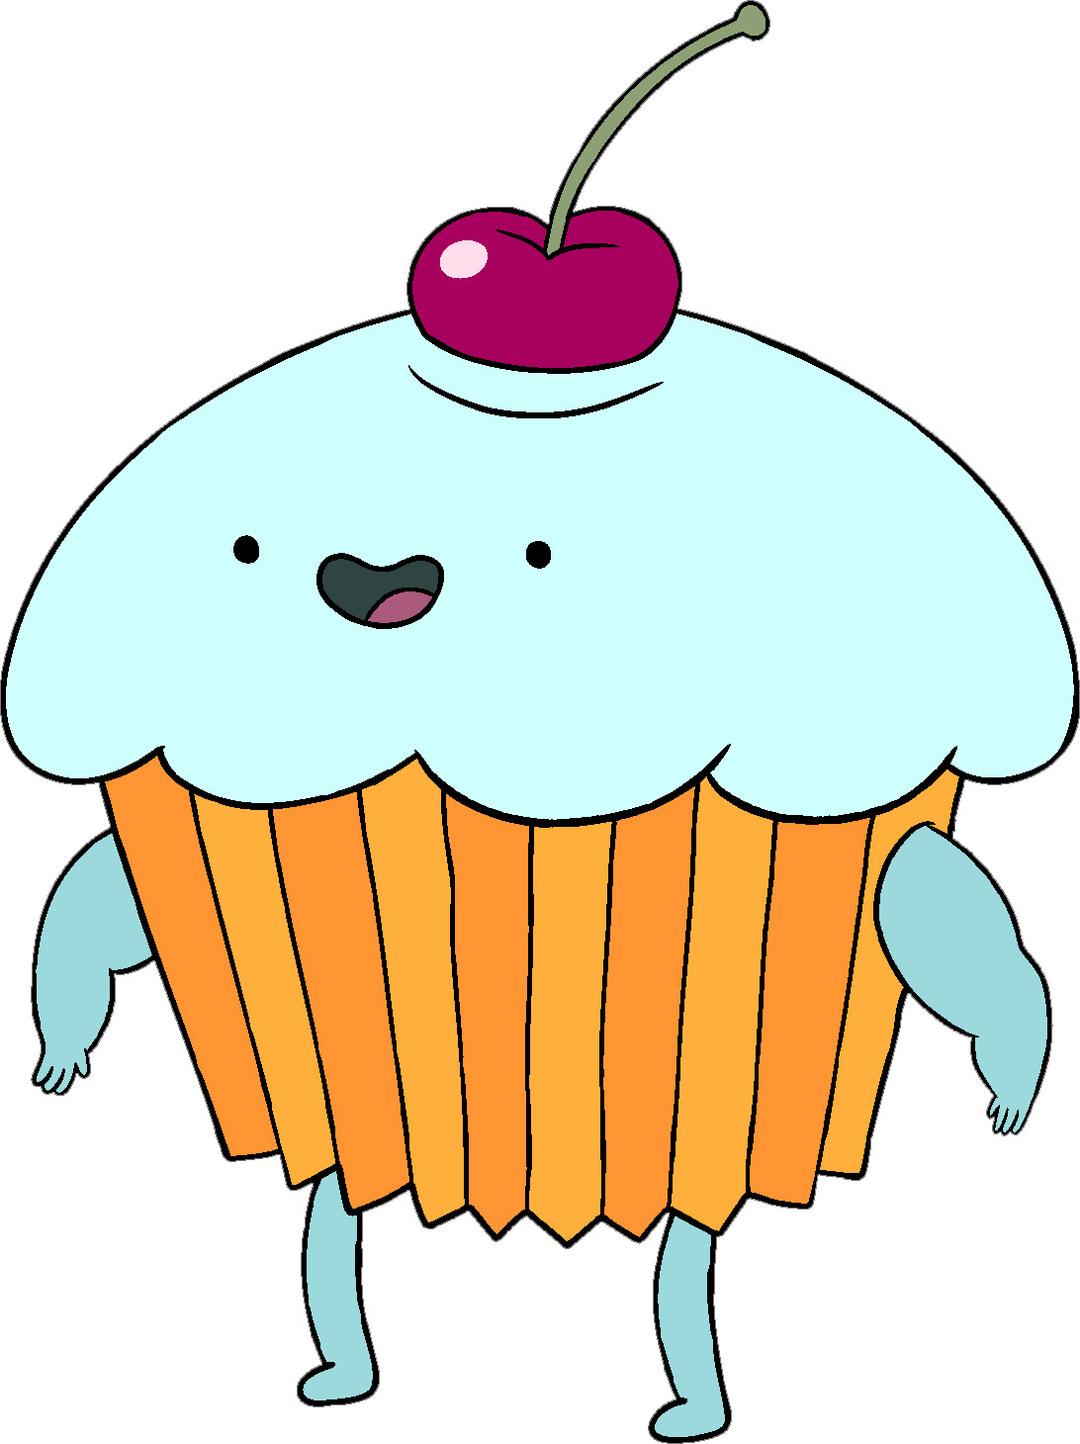 Adventure Time Cupcake With Cherry on Top png transparent